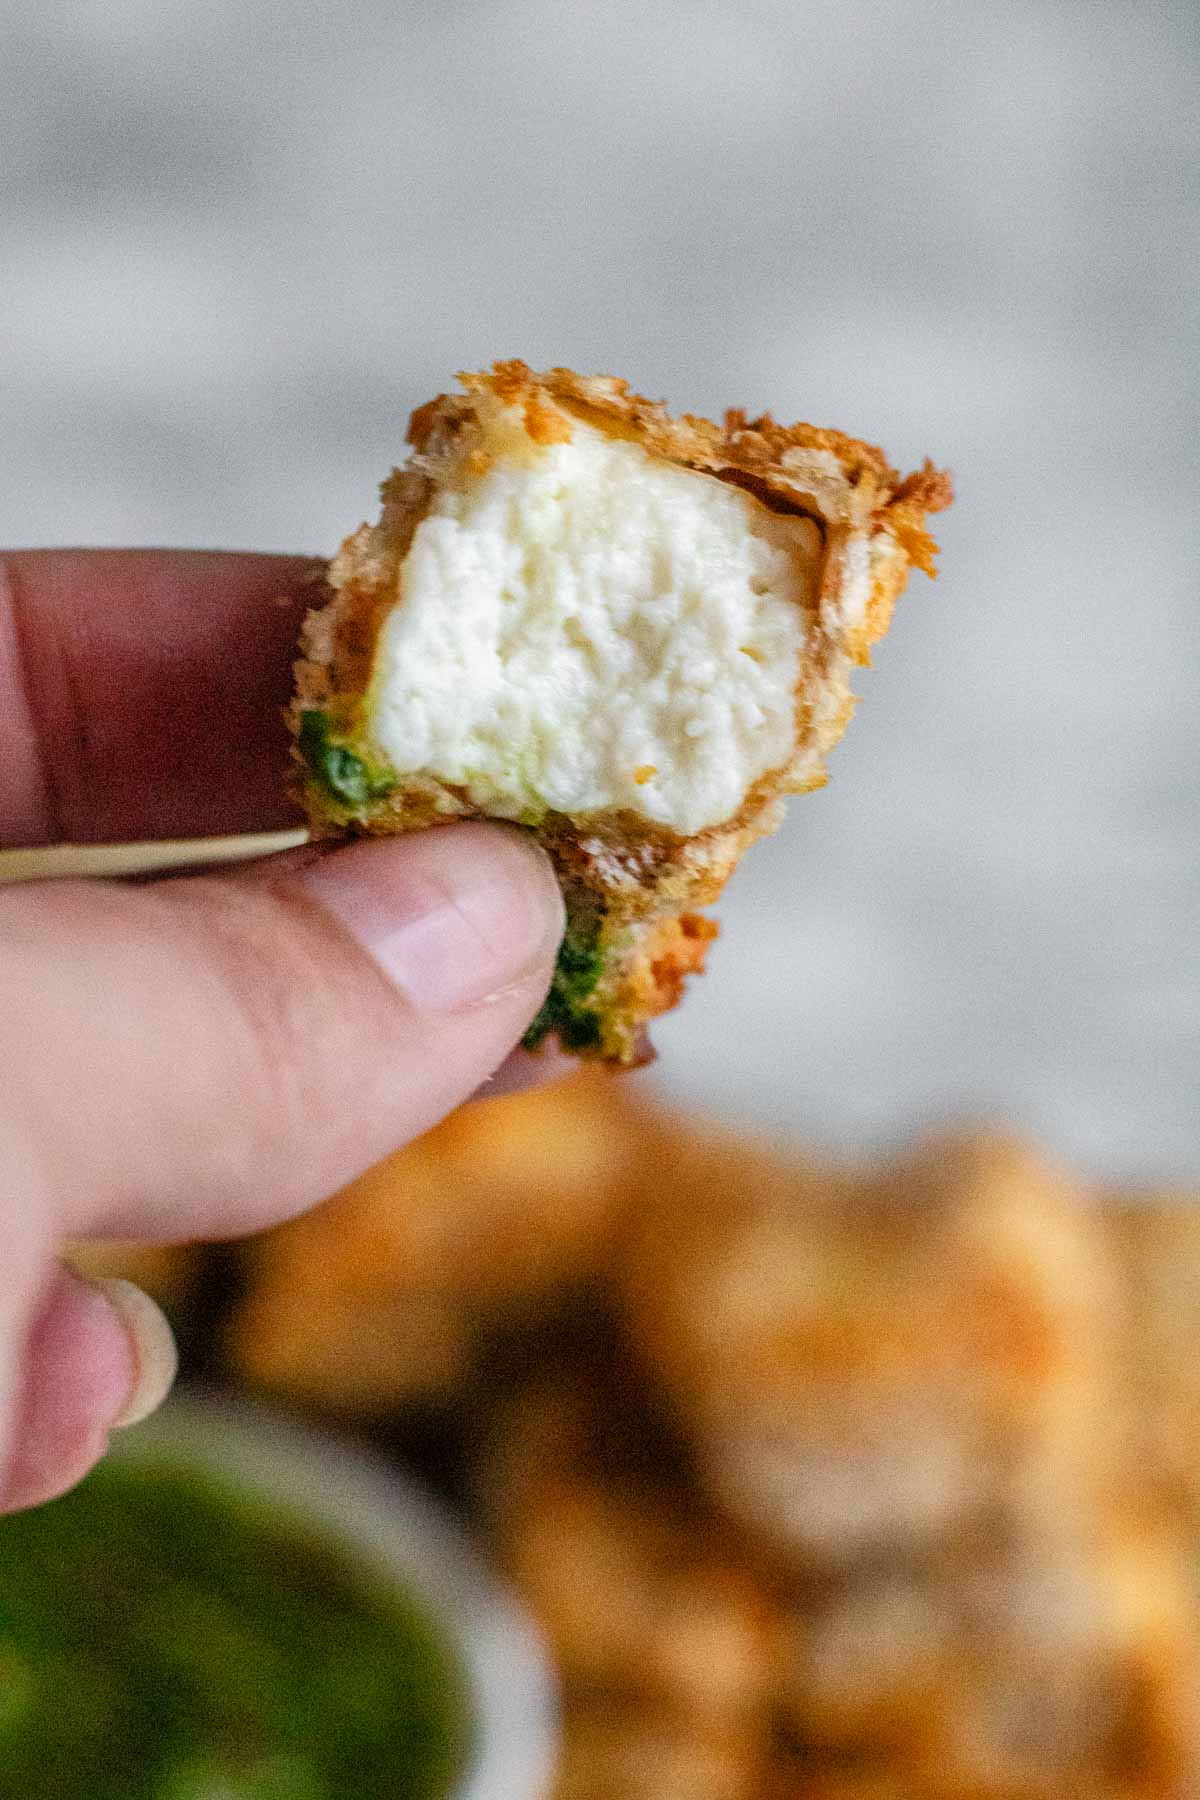 A cube of breaded paneer with a bite it in is held up by hand.